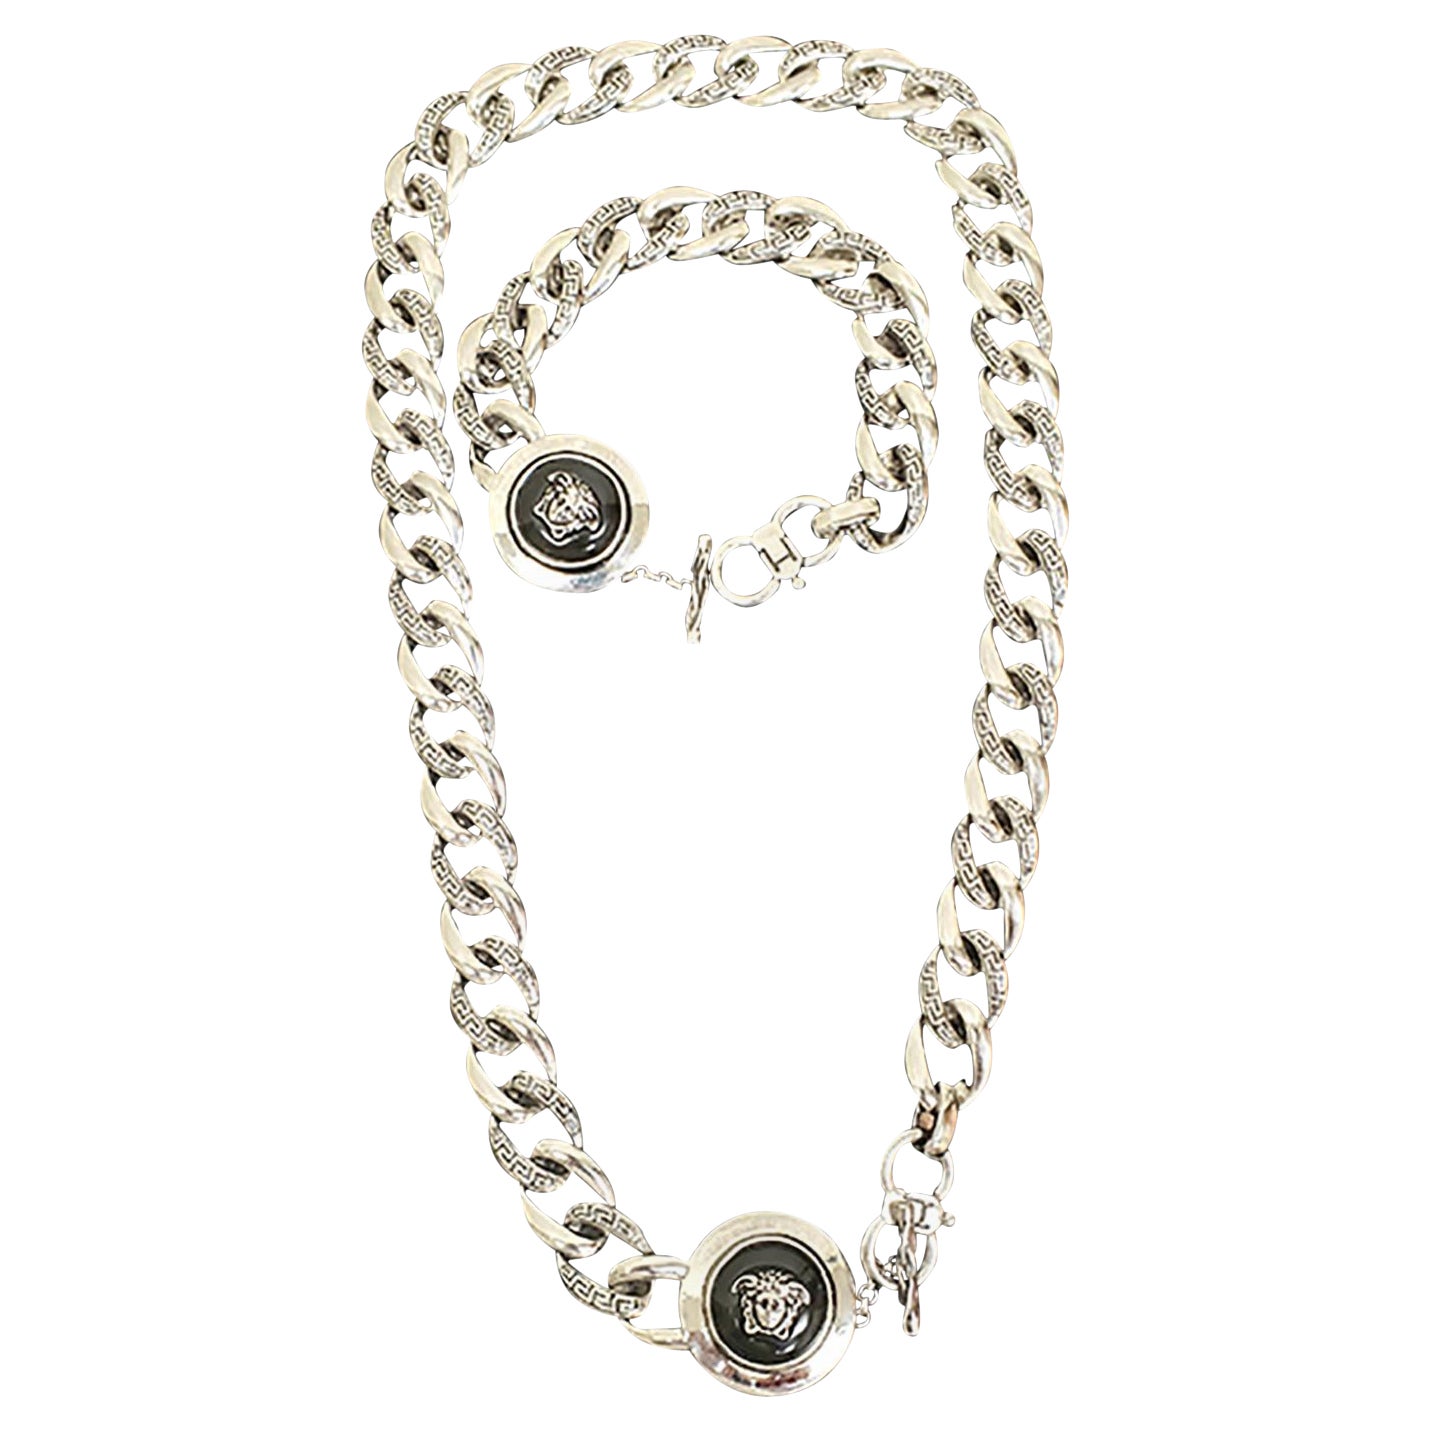 Spring 2011 L# 33 NEW VERSACE SILVER TONE METAL NECKLACE and BRACELET